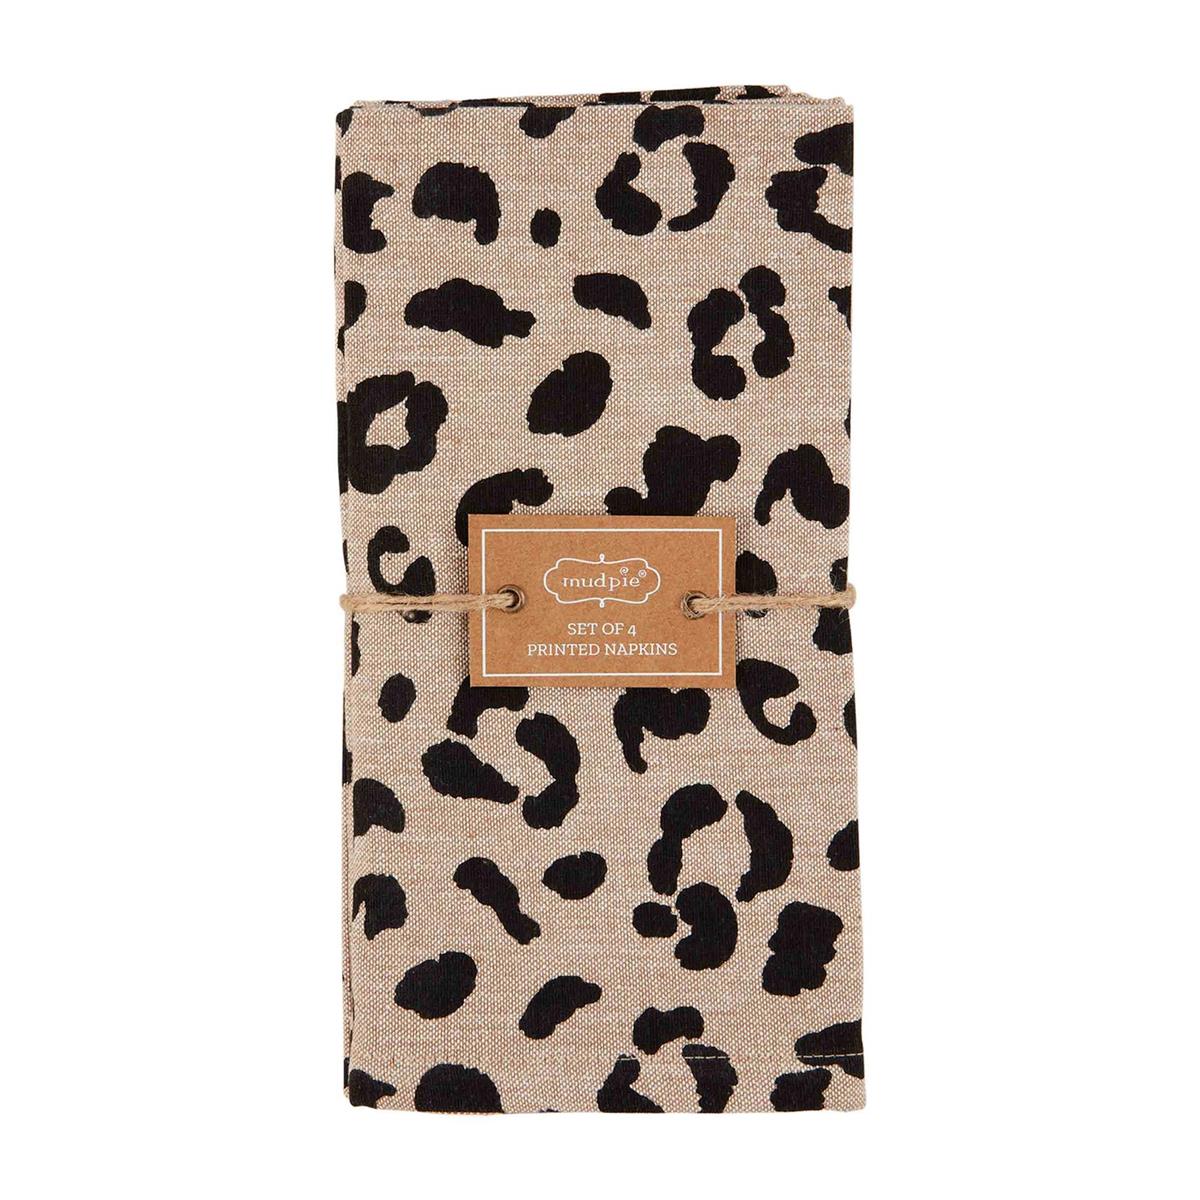 tan and cheetah print napkins folded and tied with twine on a white background